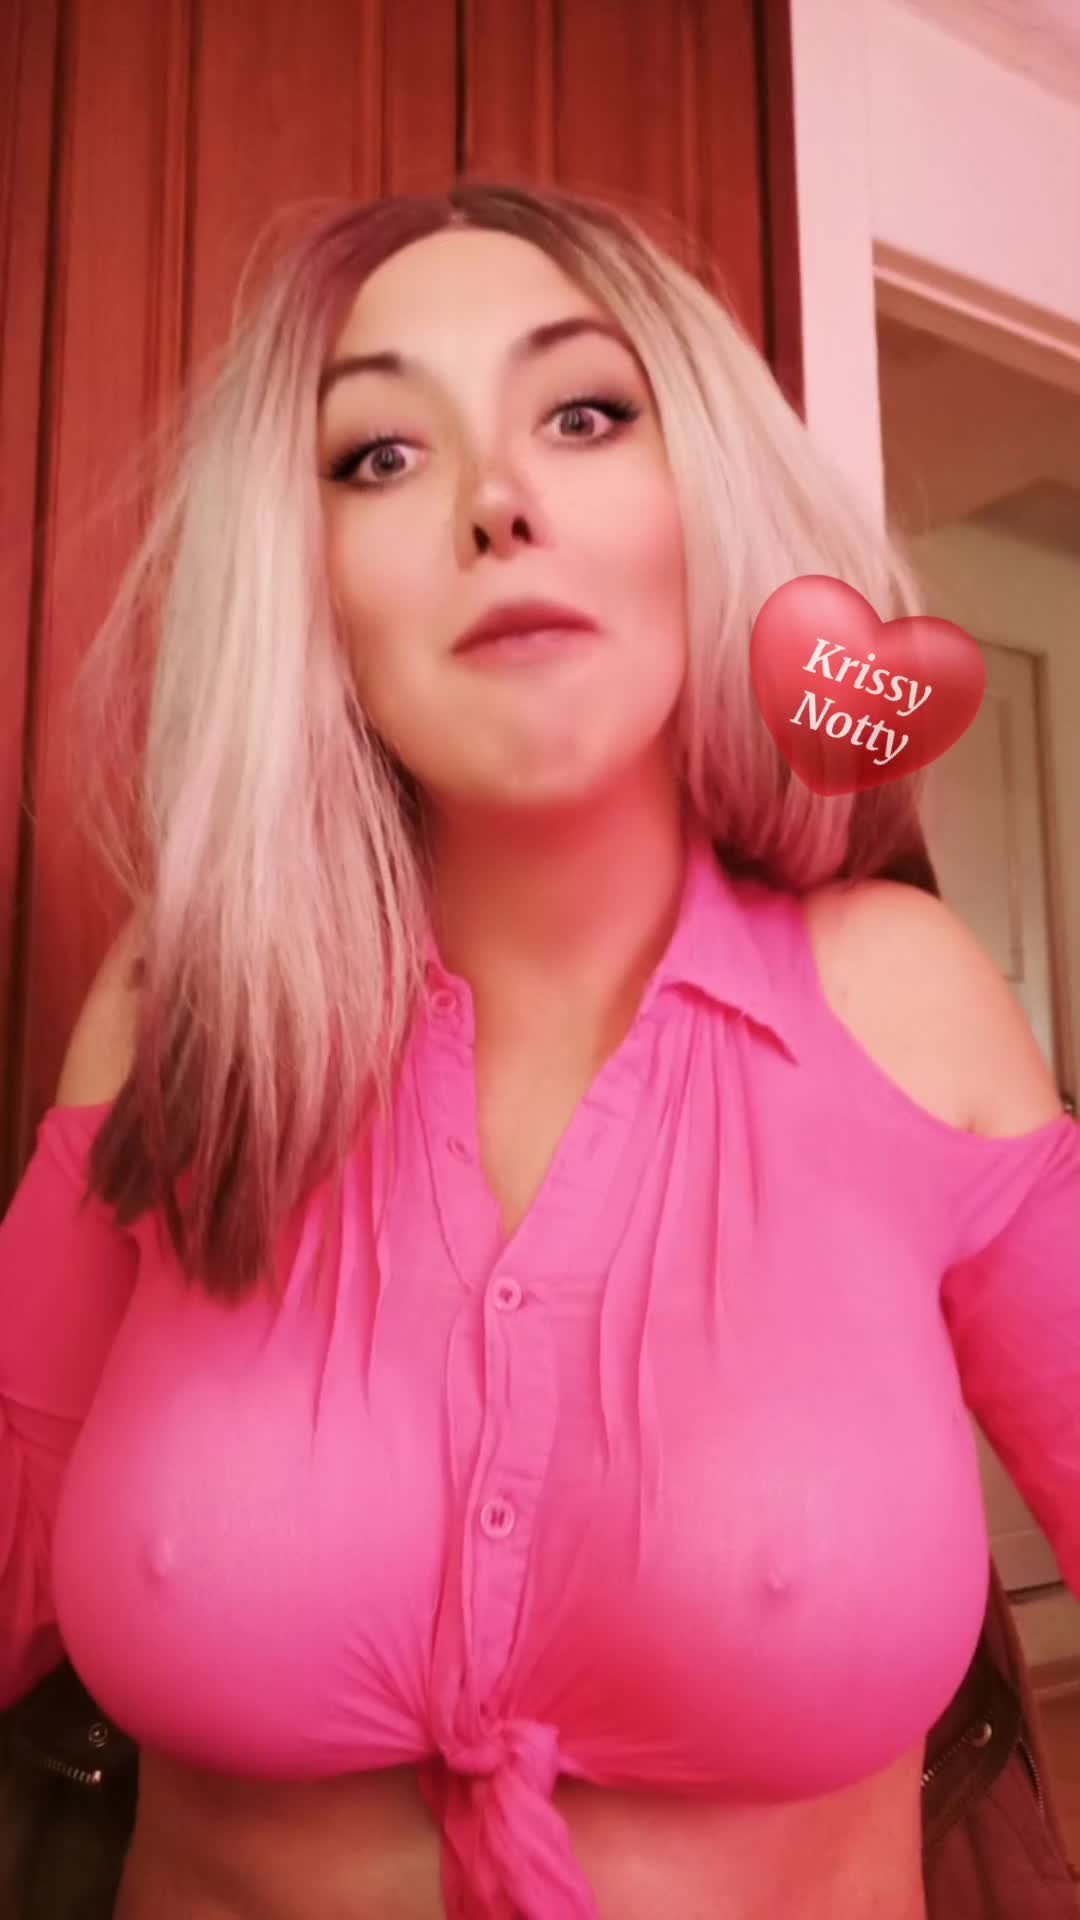 Video post by KrissyNotty